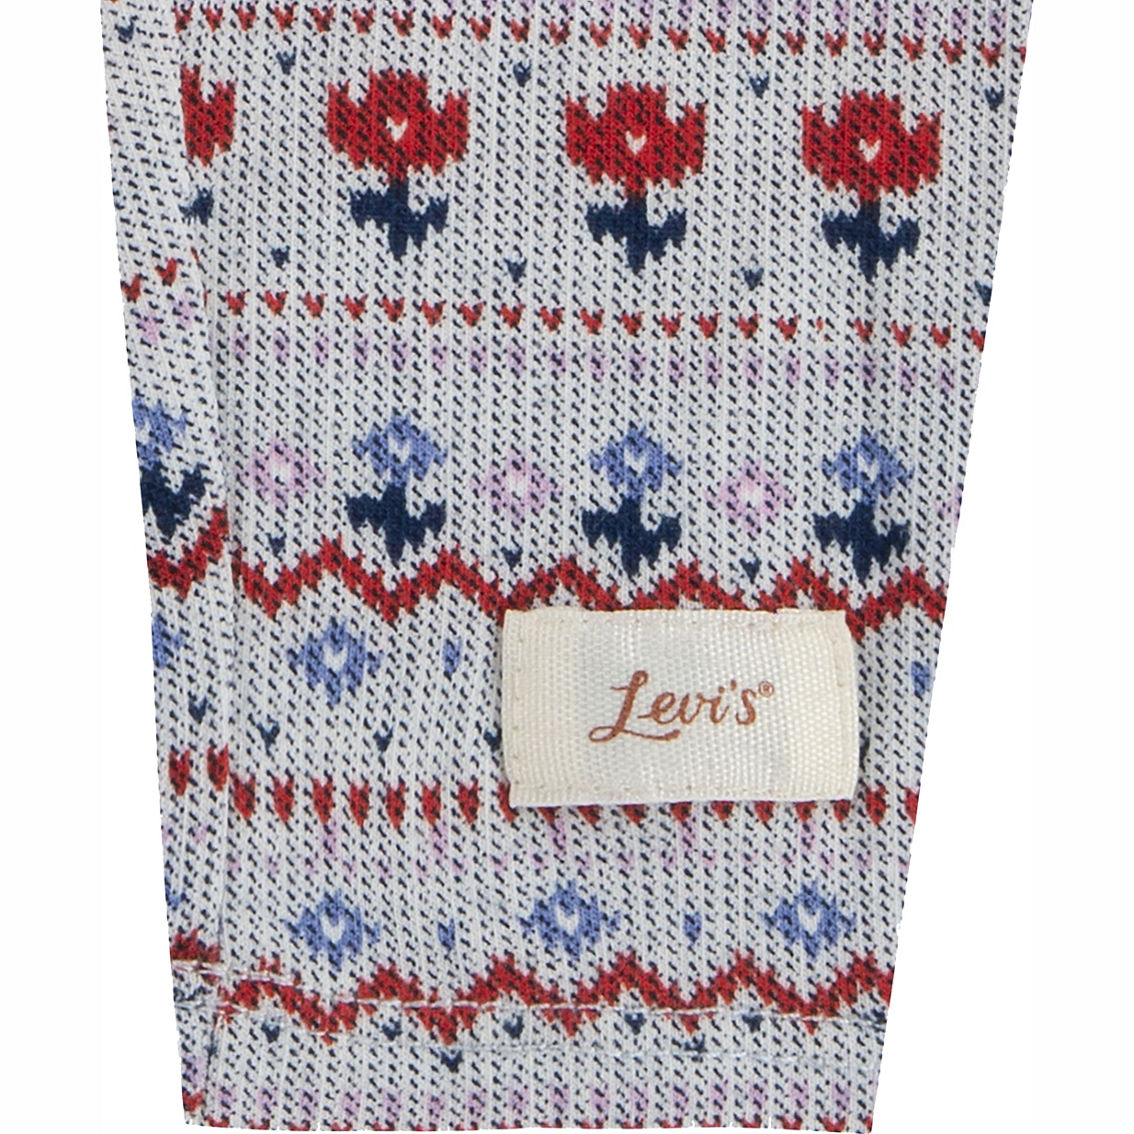 Levi's Baby Girls Knit Top and Leggings 2 pc. Set - Image 3 of 3